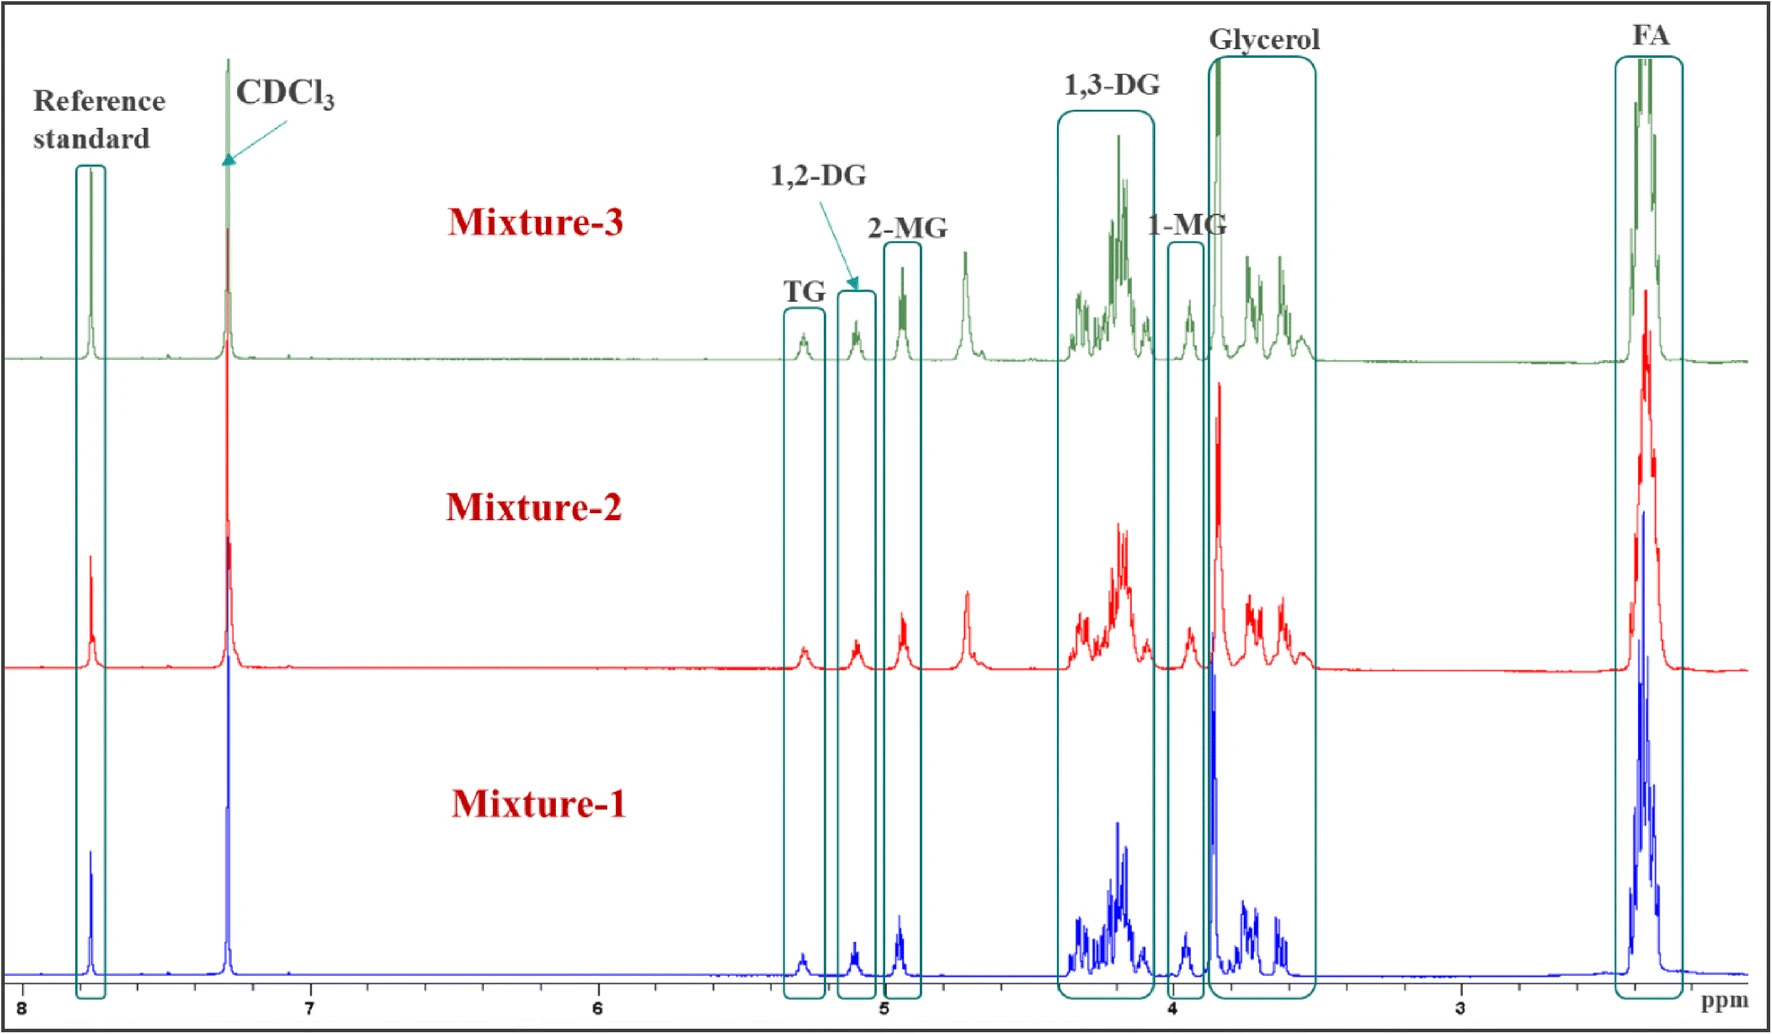 graphical abstract of Quantitative Chemical Profiling of Commercial Glyceride Excipients via 1H NMR Spectroscopy